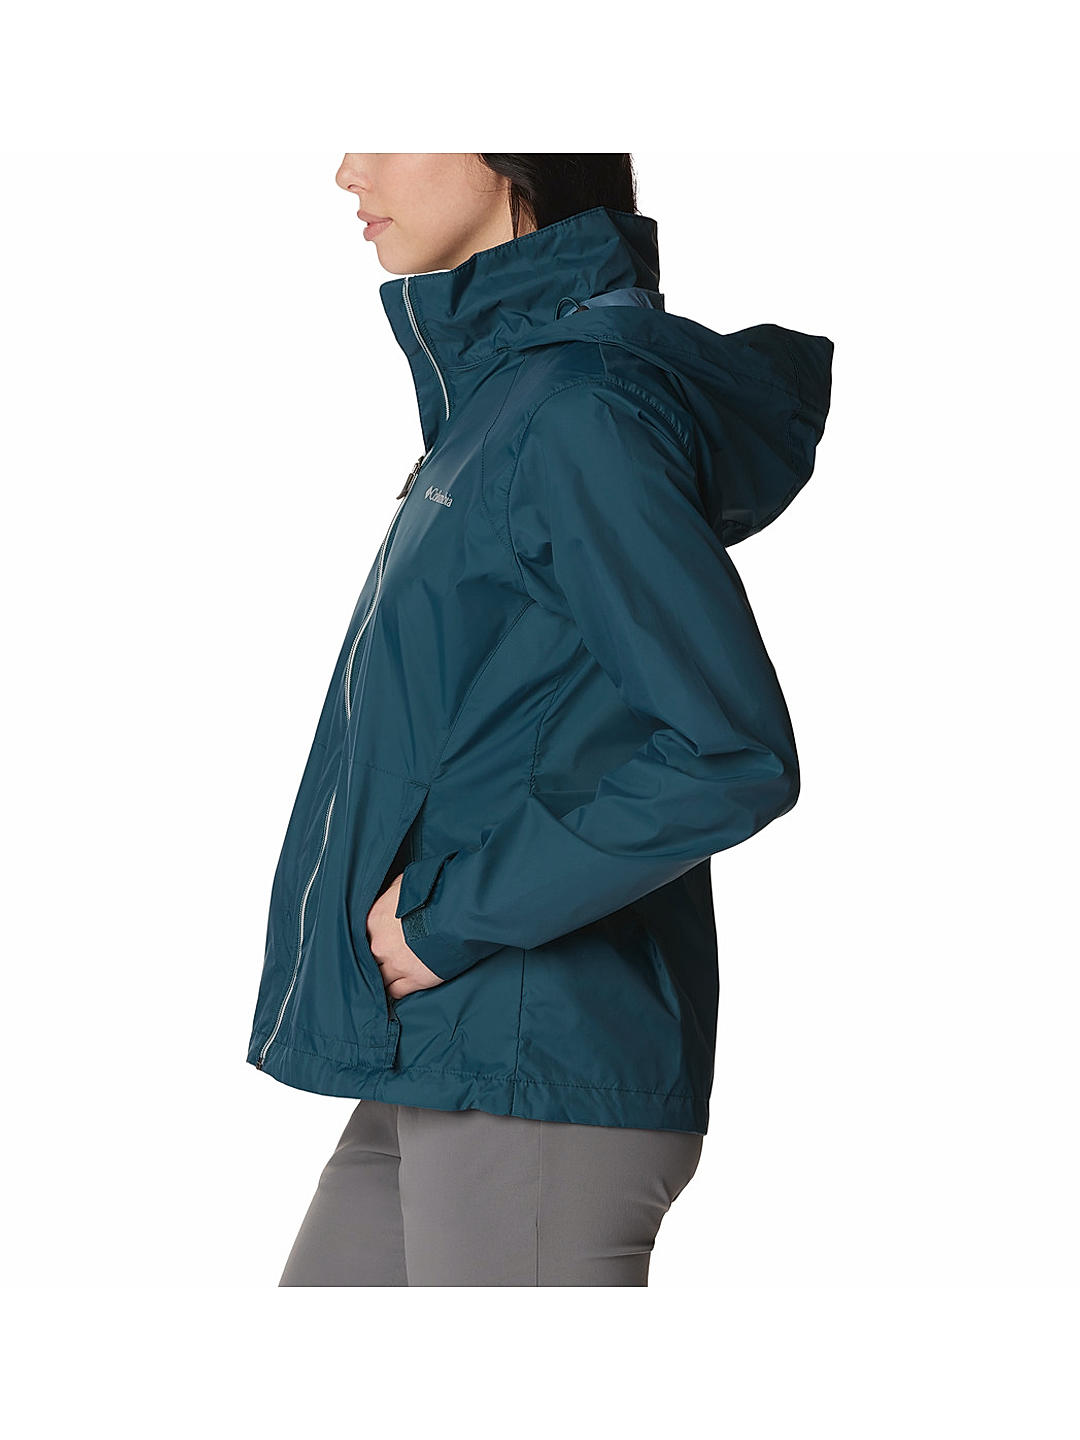 Columbia Sportswear Women's Switchback III Jacket at Tractor Supply Co.